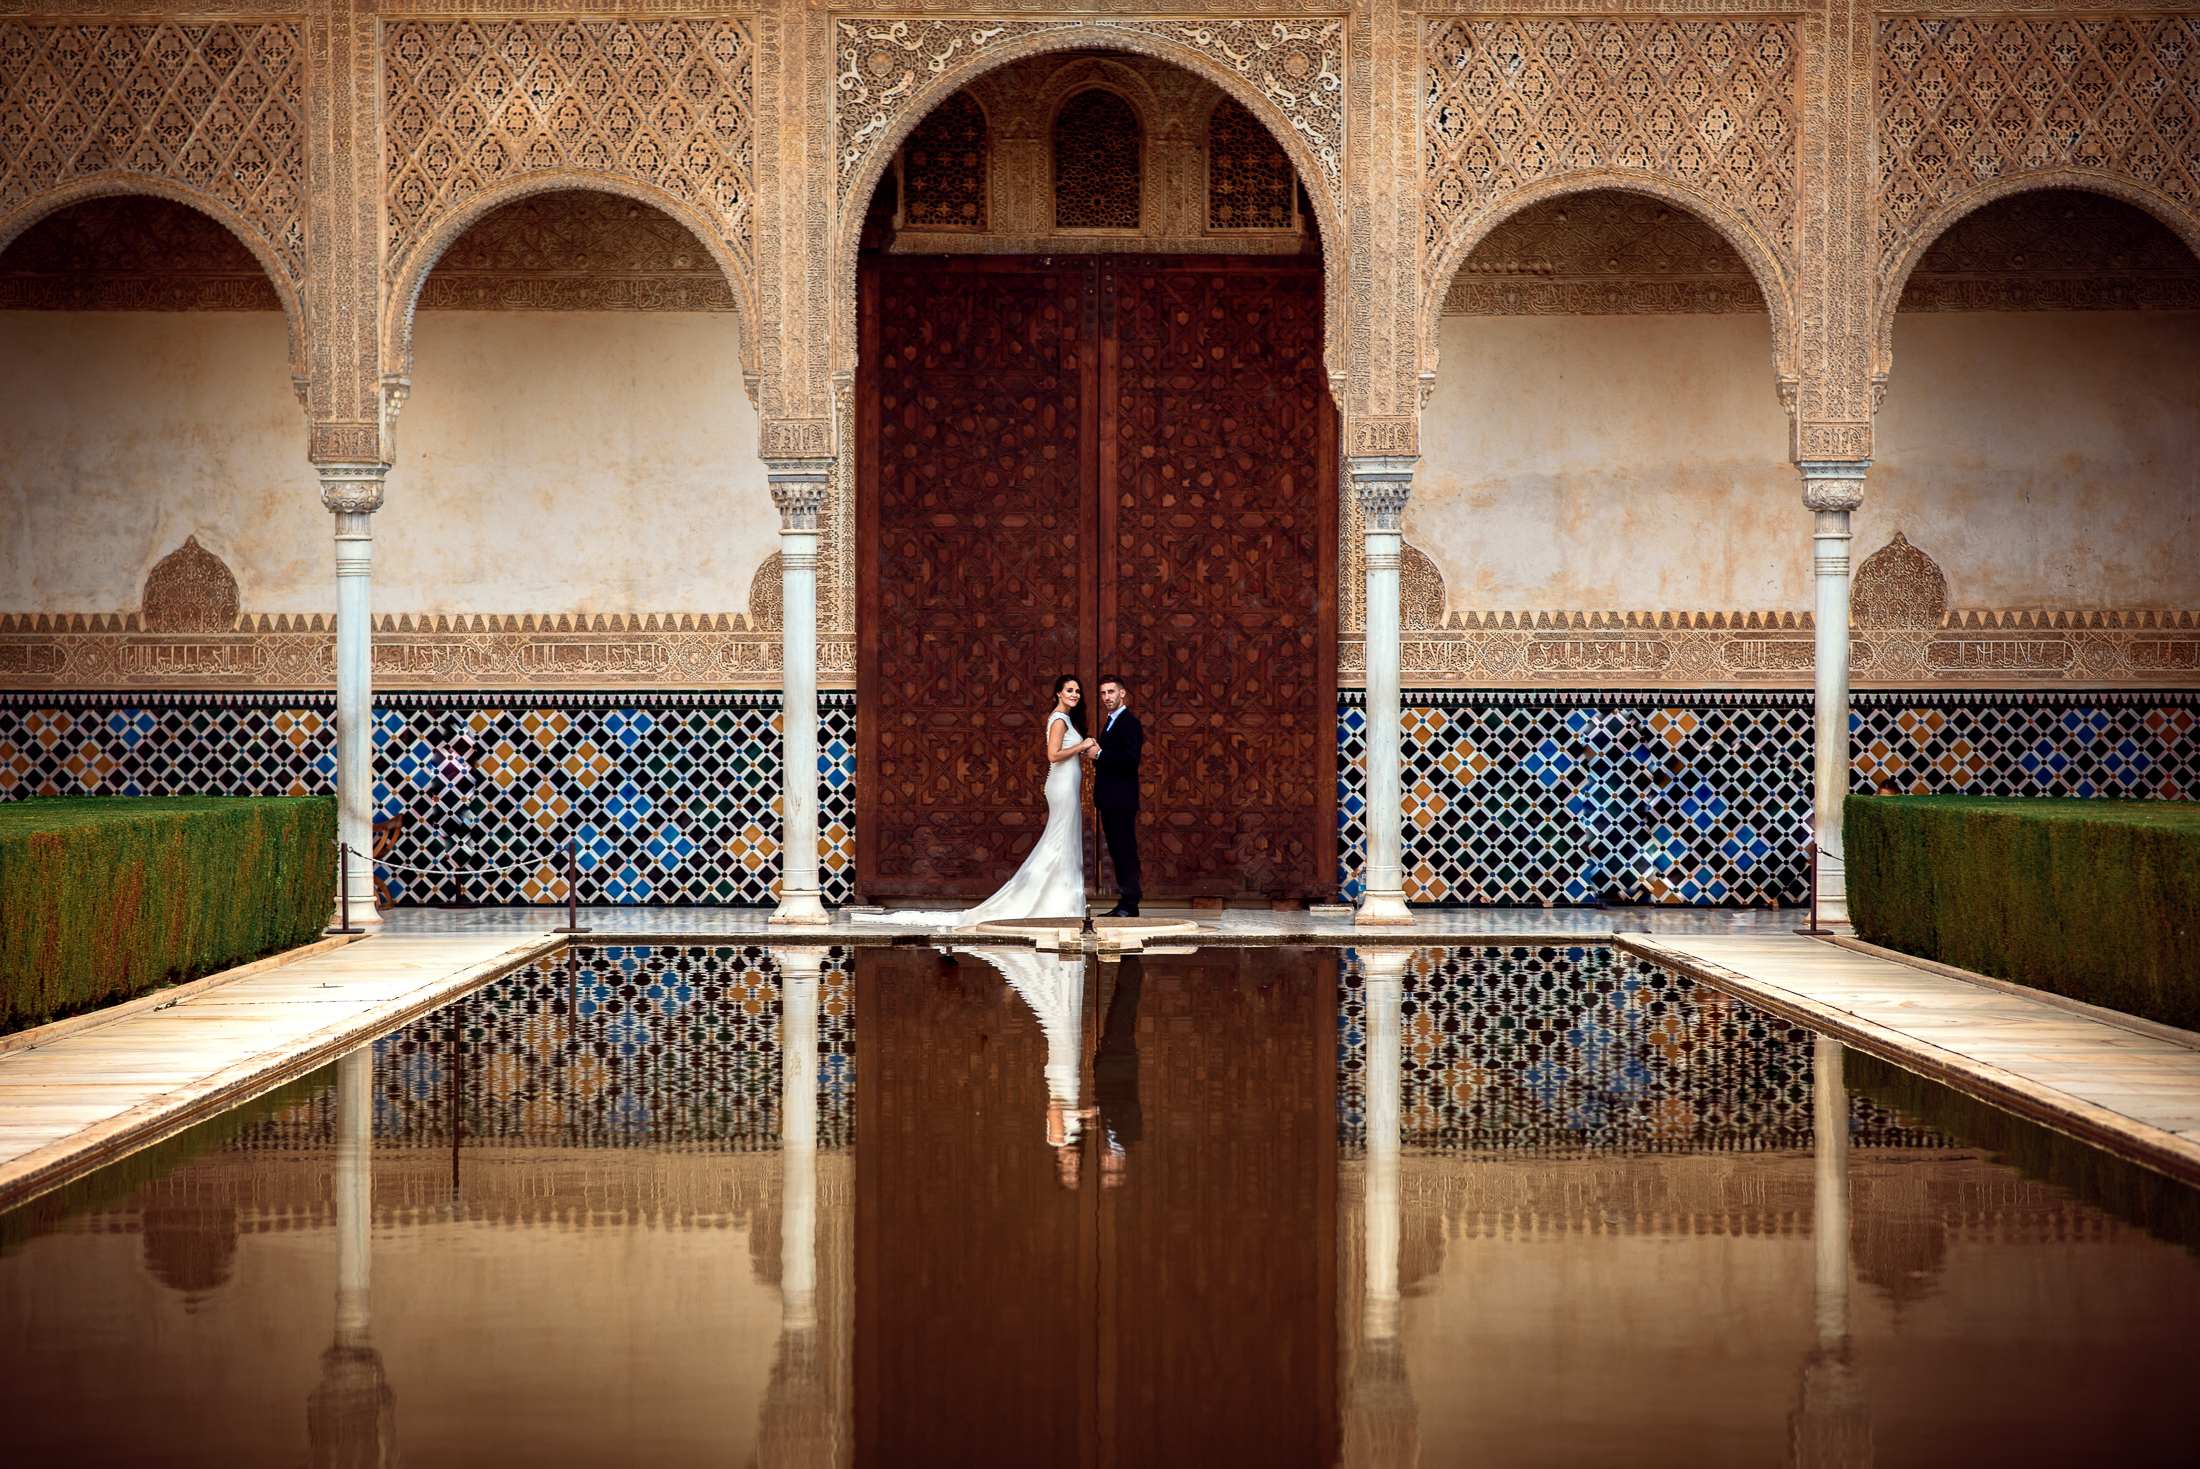 Wedding in Alhambra, Court of the Myrtles